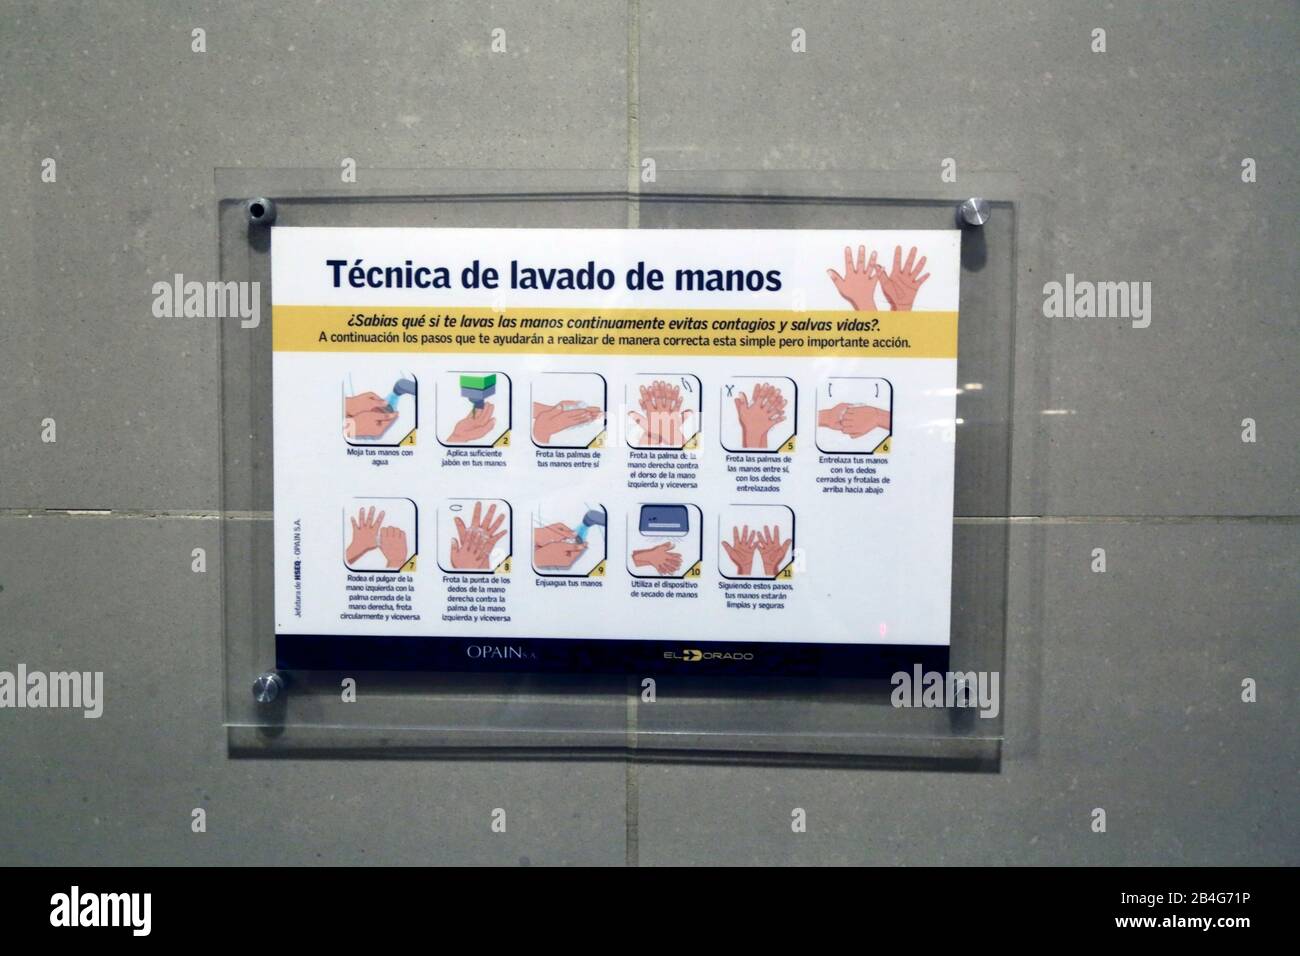 March 3rd, 2020, Bogotá, Colombia: Sign in Spanish with diagrams showing hand washing technique to reduce risk of catching the 2019nCoV coronavirus next to sinks in restrooms of the El Dorado International Airport, Bogotá, Colombia. Stock Photo